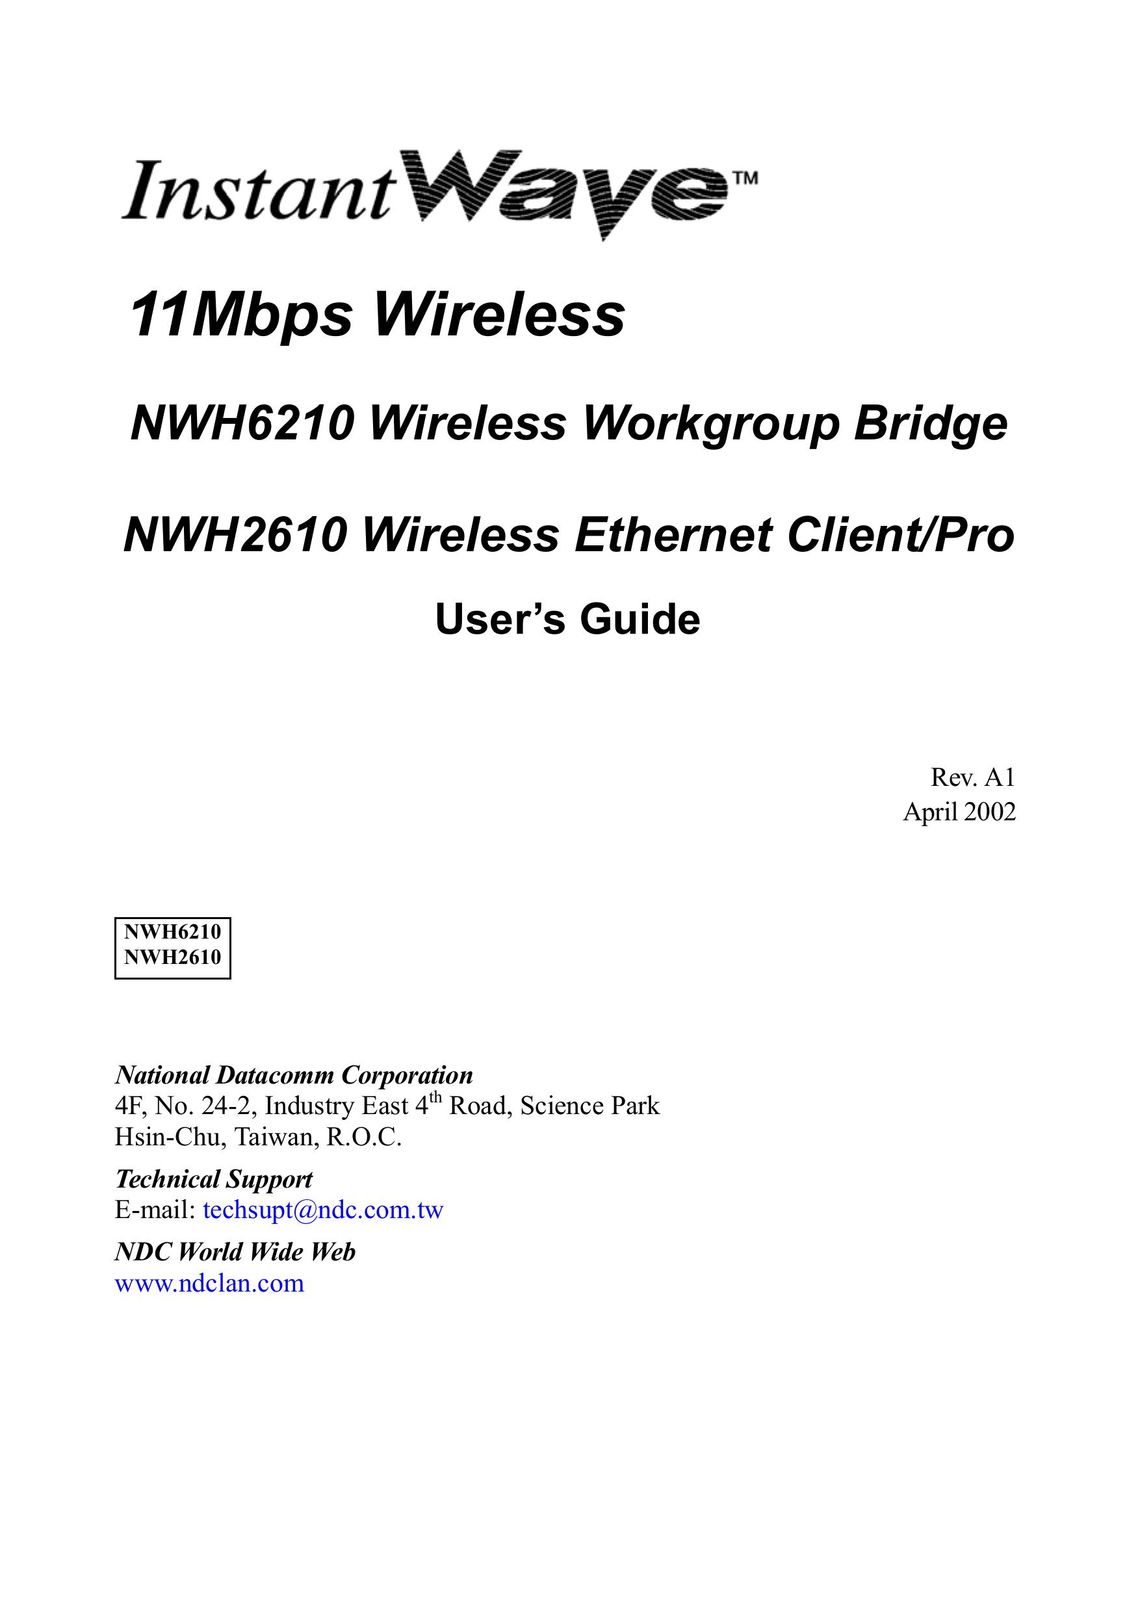 NDC comm NWH2610 Network Card User Manual